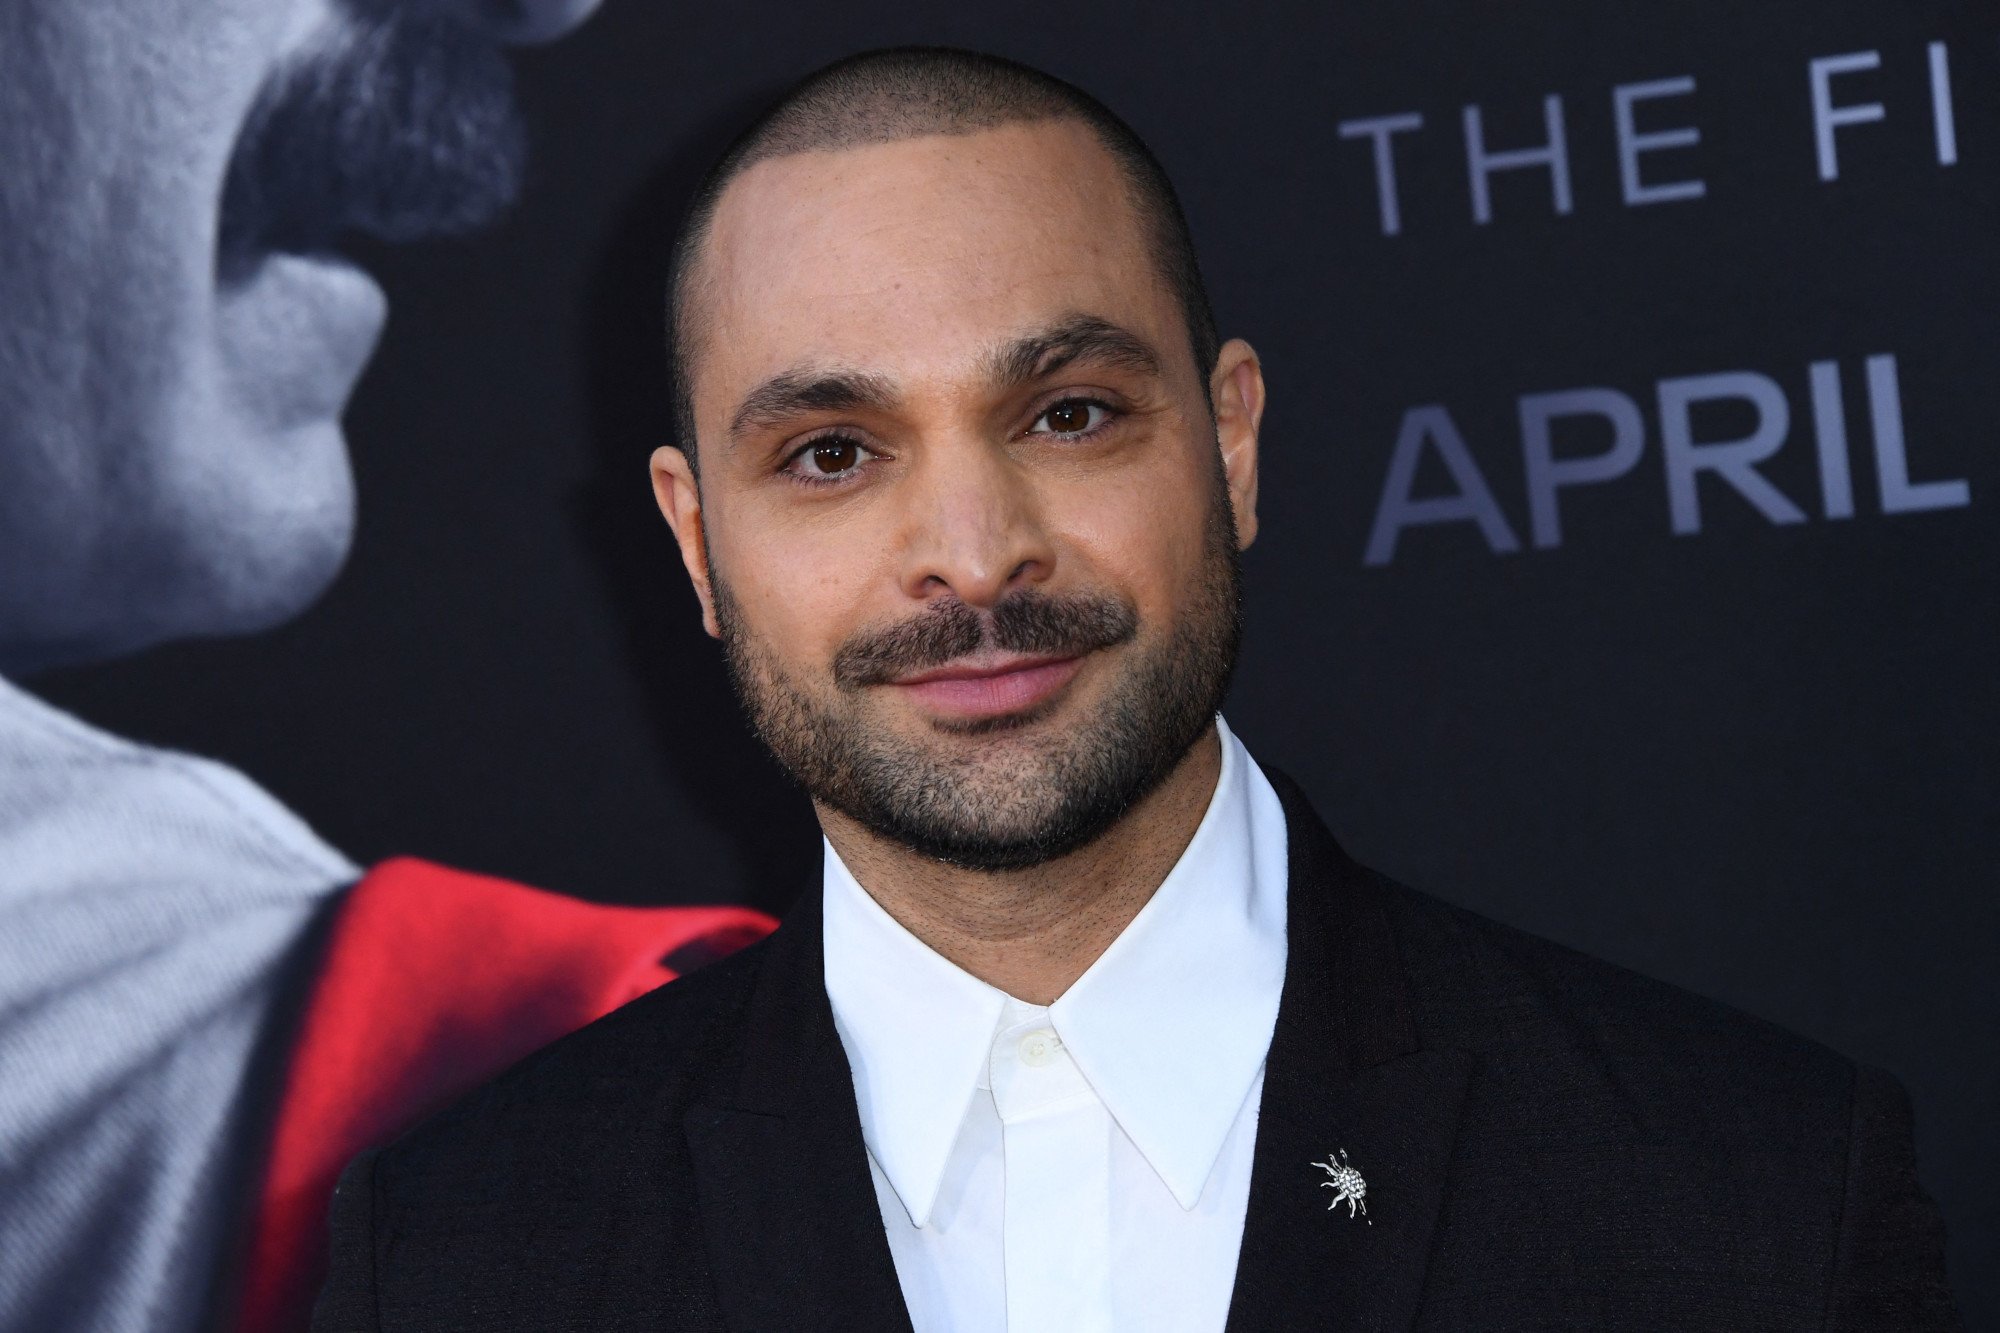 Michael Mando joins the 'Better Call Saul' cast at the premiere for season 6. He's wearing a white collared shirt and black jacket.